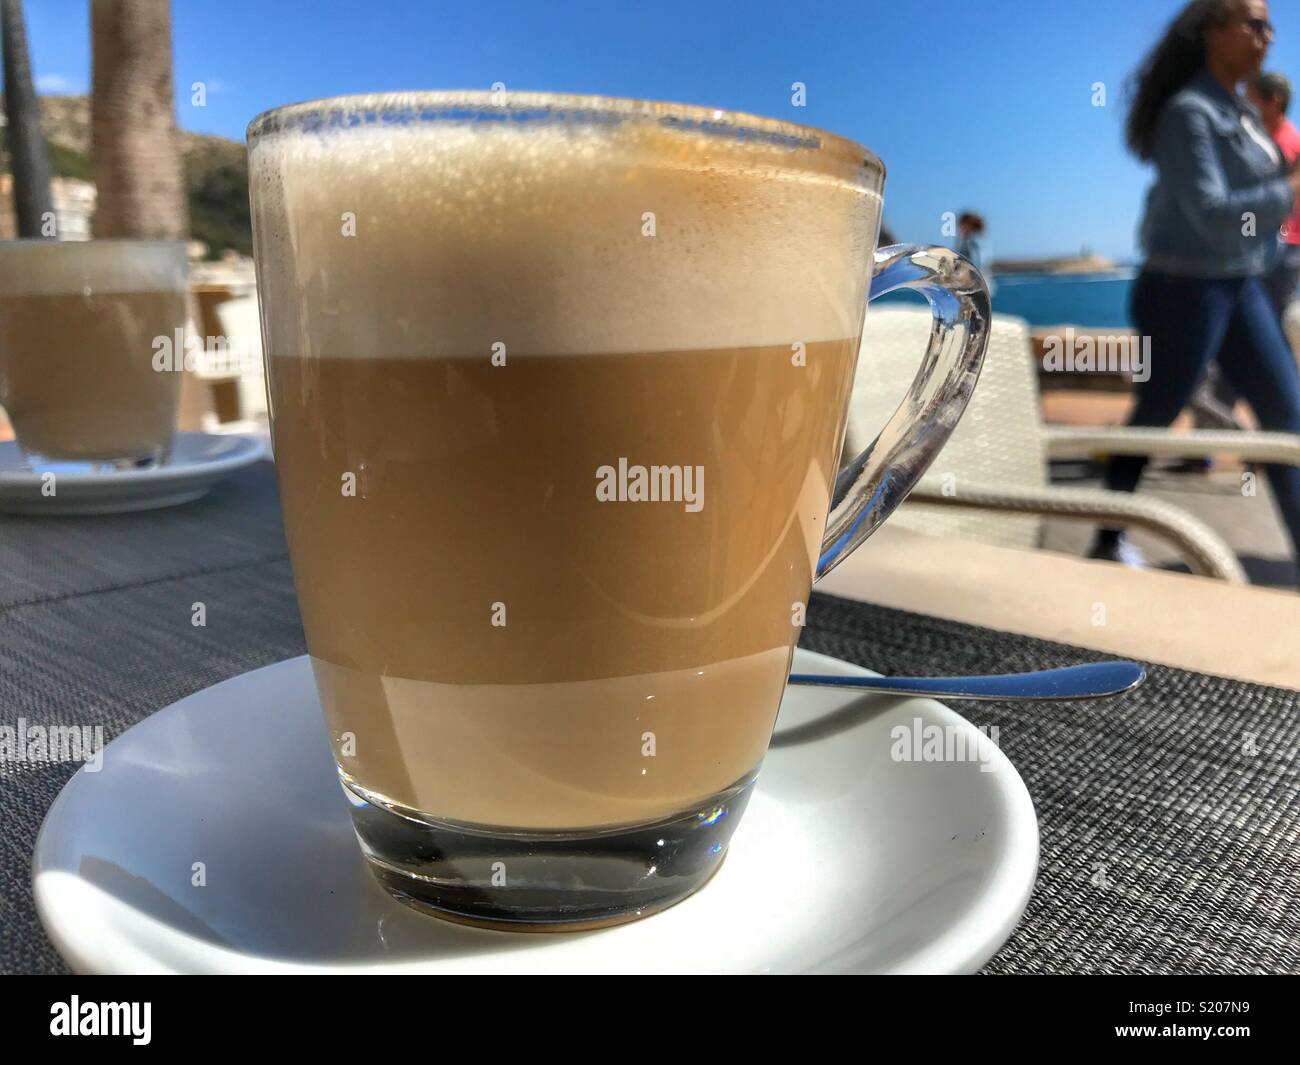 https://c8.alamy.com/comp/S207N9/cafe-con-leche-milky-white-coffee-on-a-table-in-a-cafe-on-the-waterfront-promenade-in-the-port-area-of-javea-xabia-on-the-costa-blanca-alicante-province-comunidad-valenciana-spain-S207N9.jpg